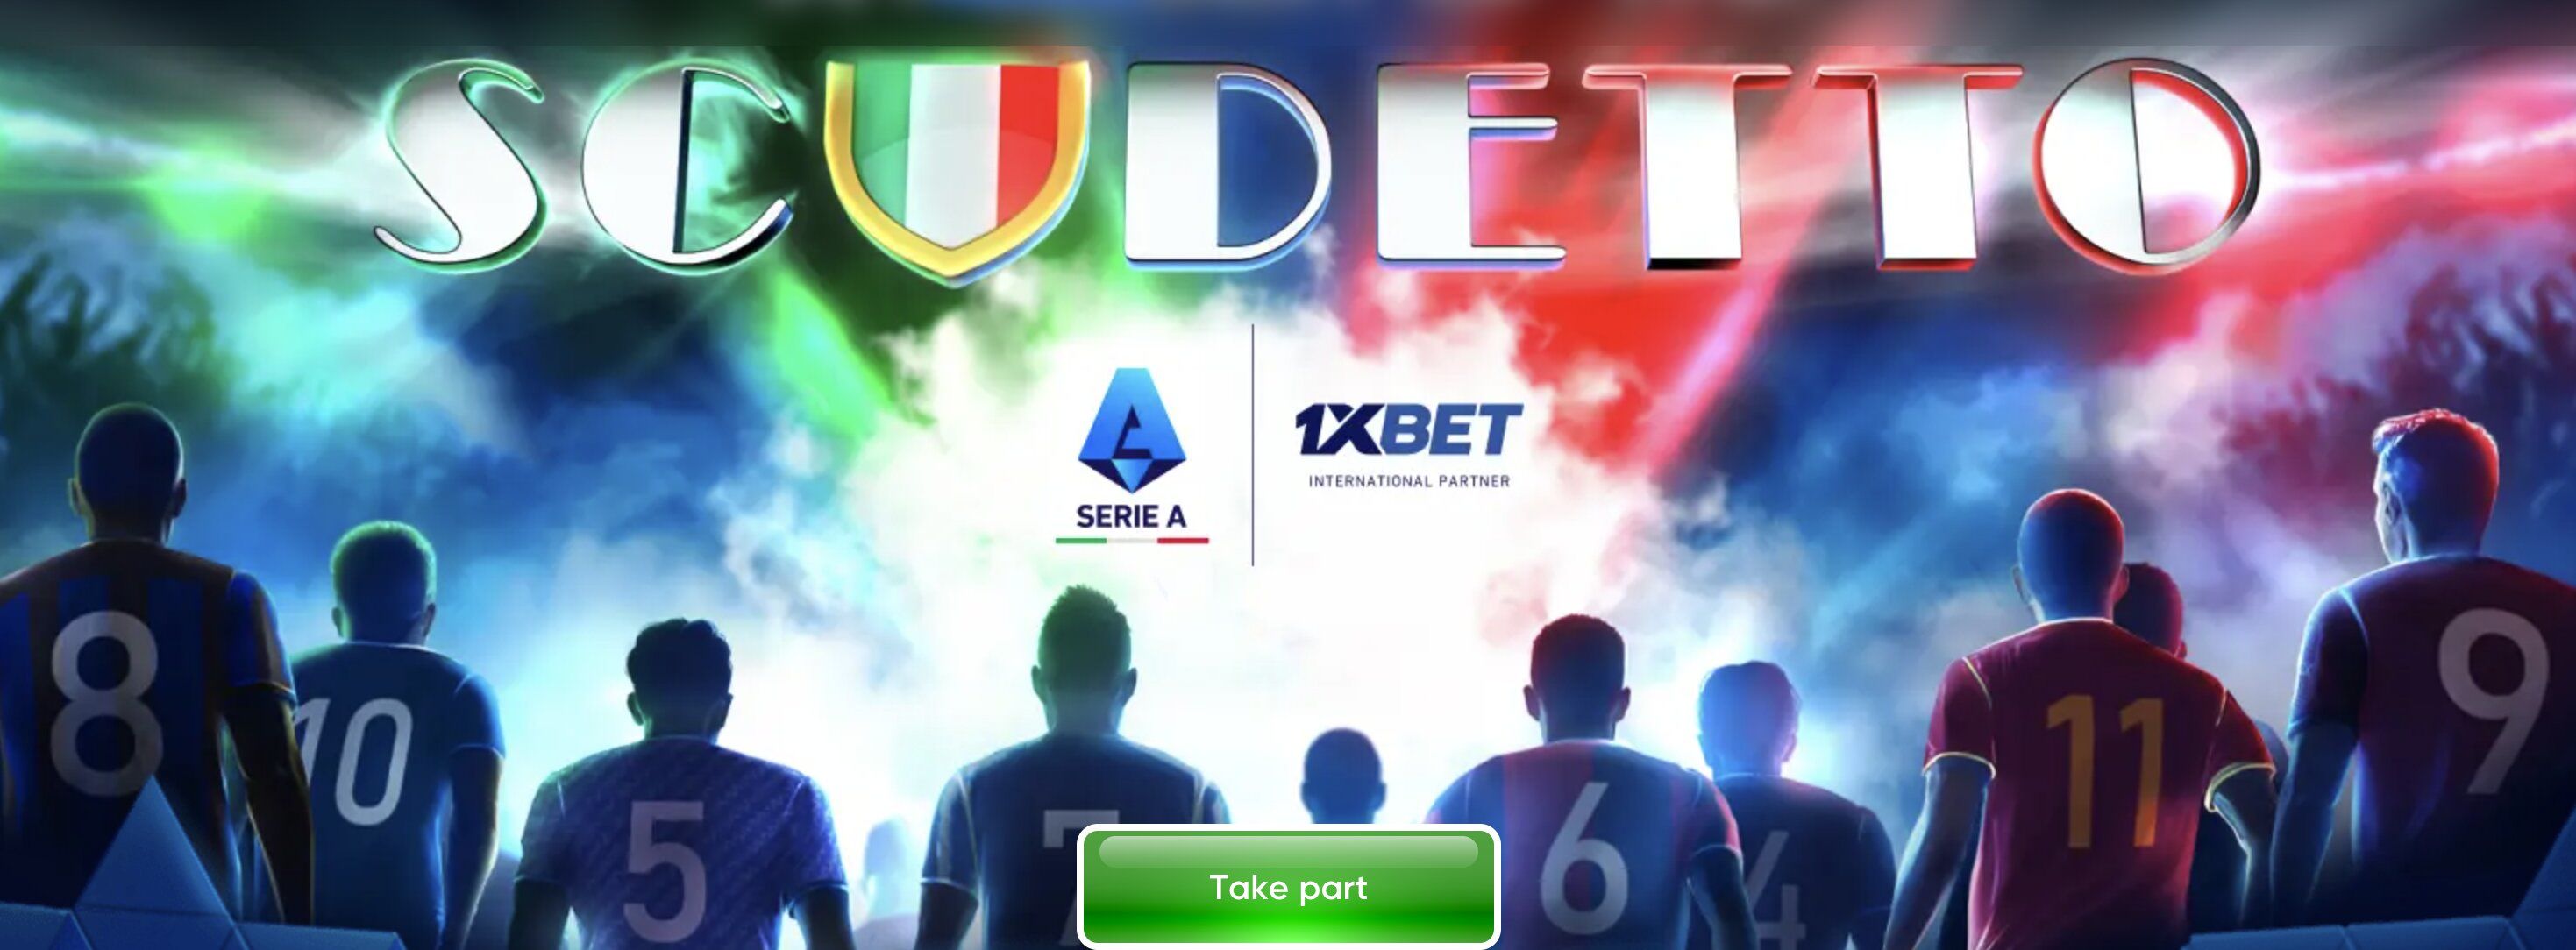 1xBet In Pursuit of the Scudetto Promotion